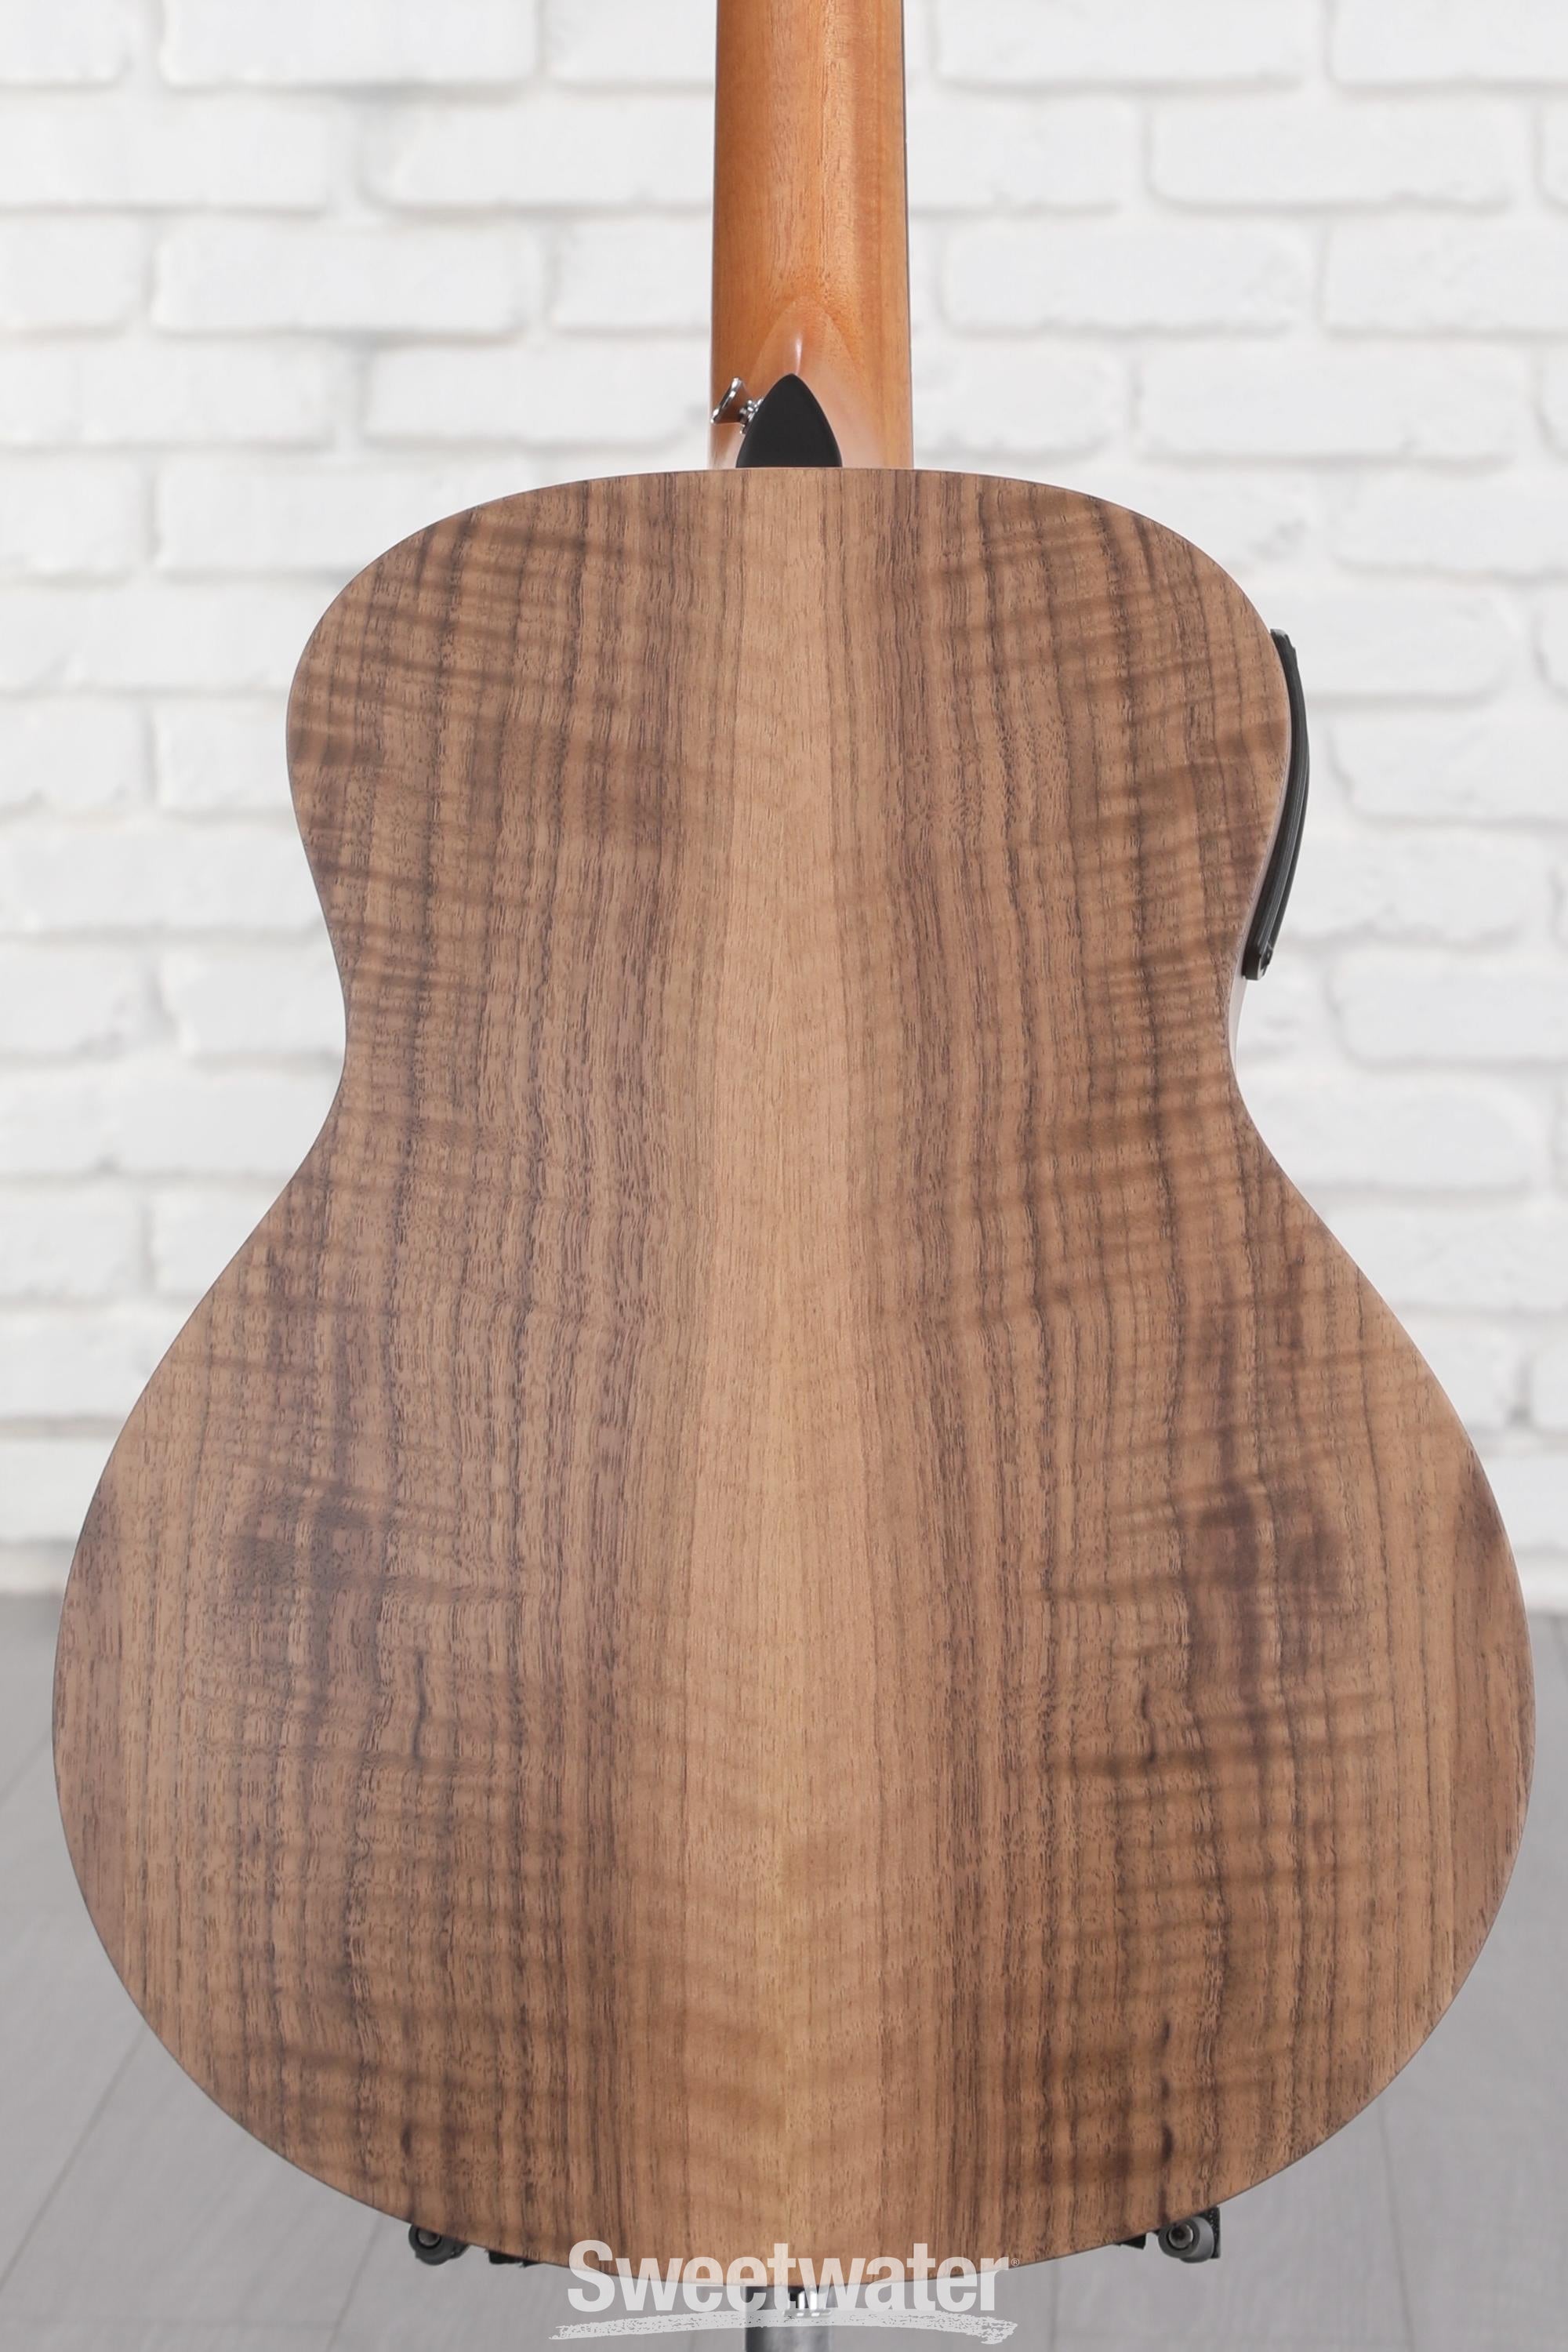 Taylor GS Mini-e Walnut Special-edition Acoustic-electric Guitar - Shaded  Edgeburst